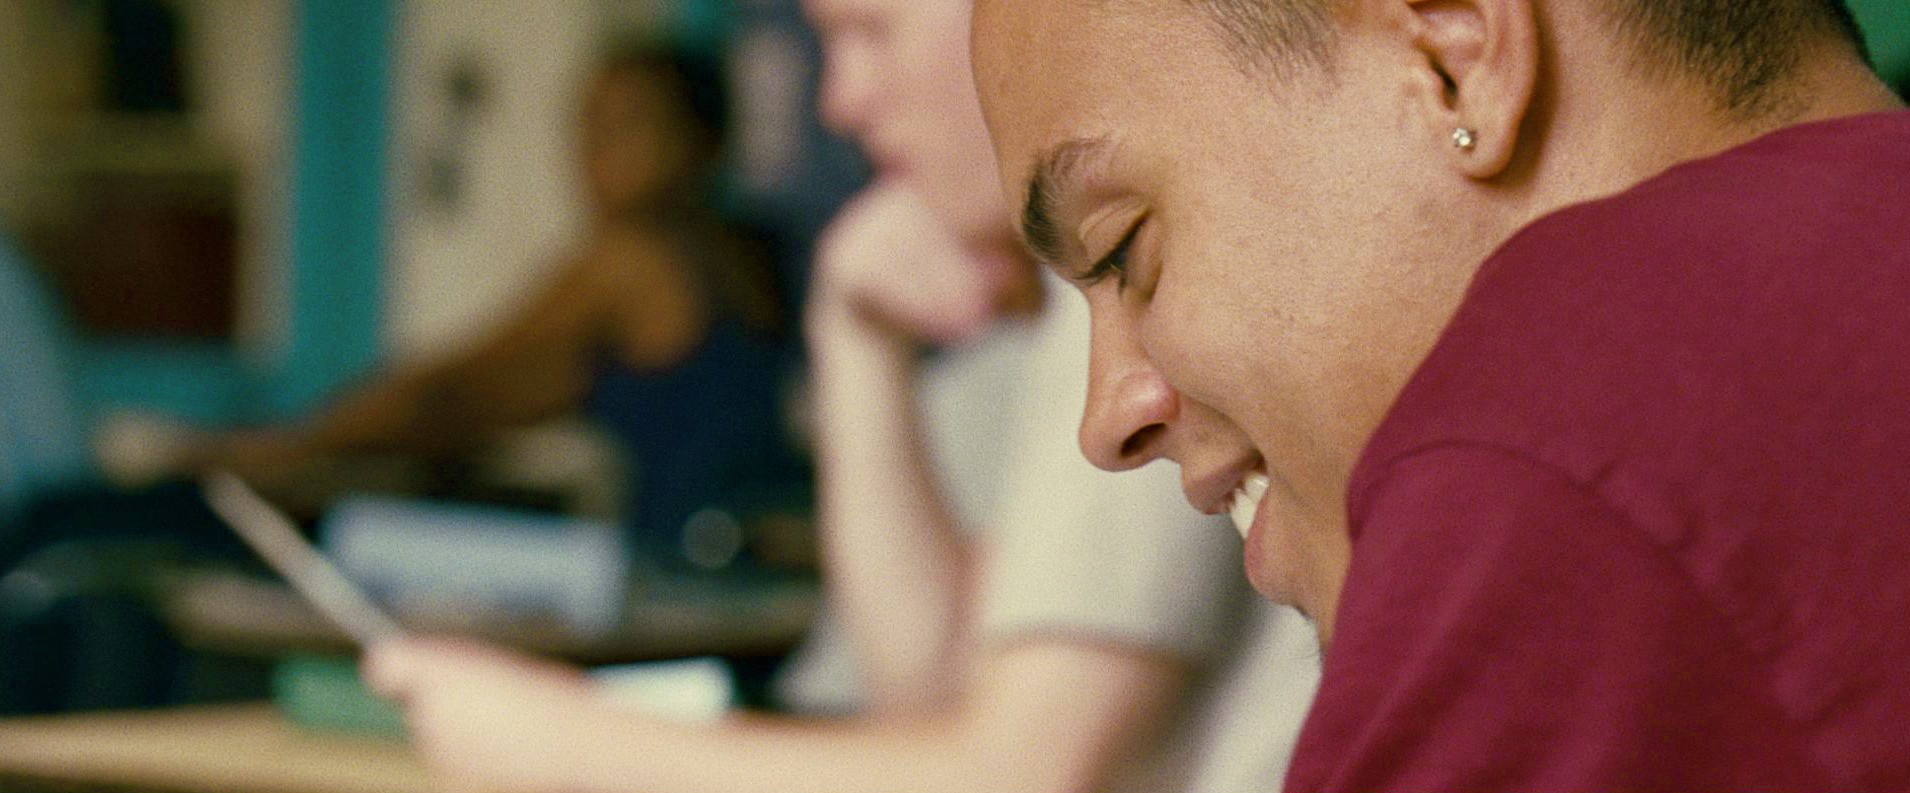 Evan Ross stars as Dre in ARC Entertainment's 96 Minutes (2012)